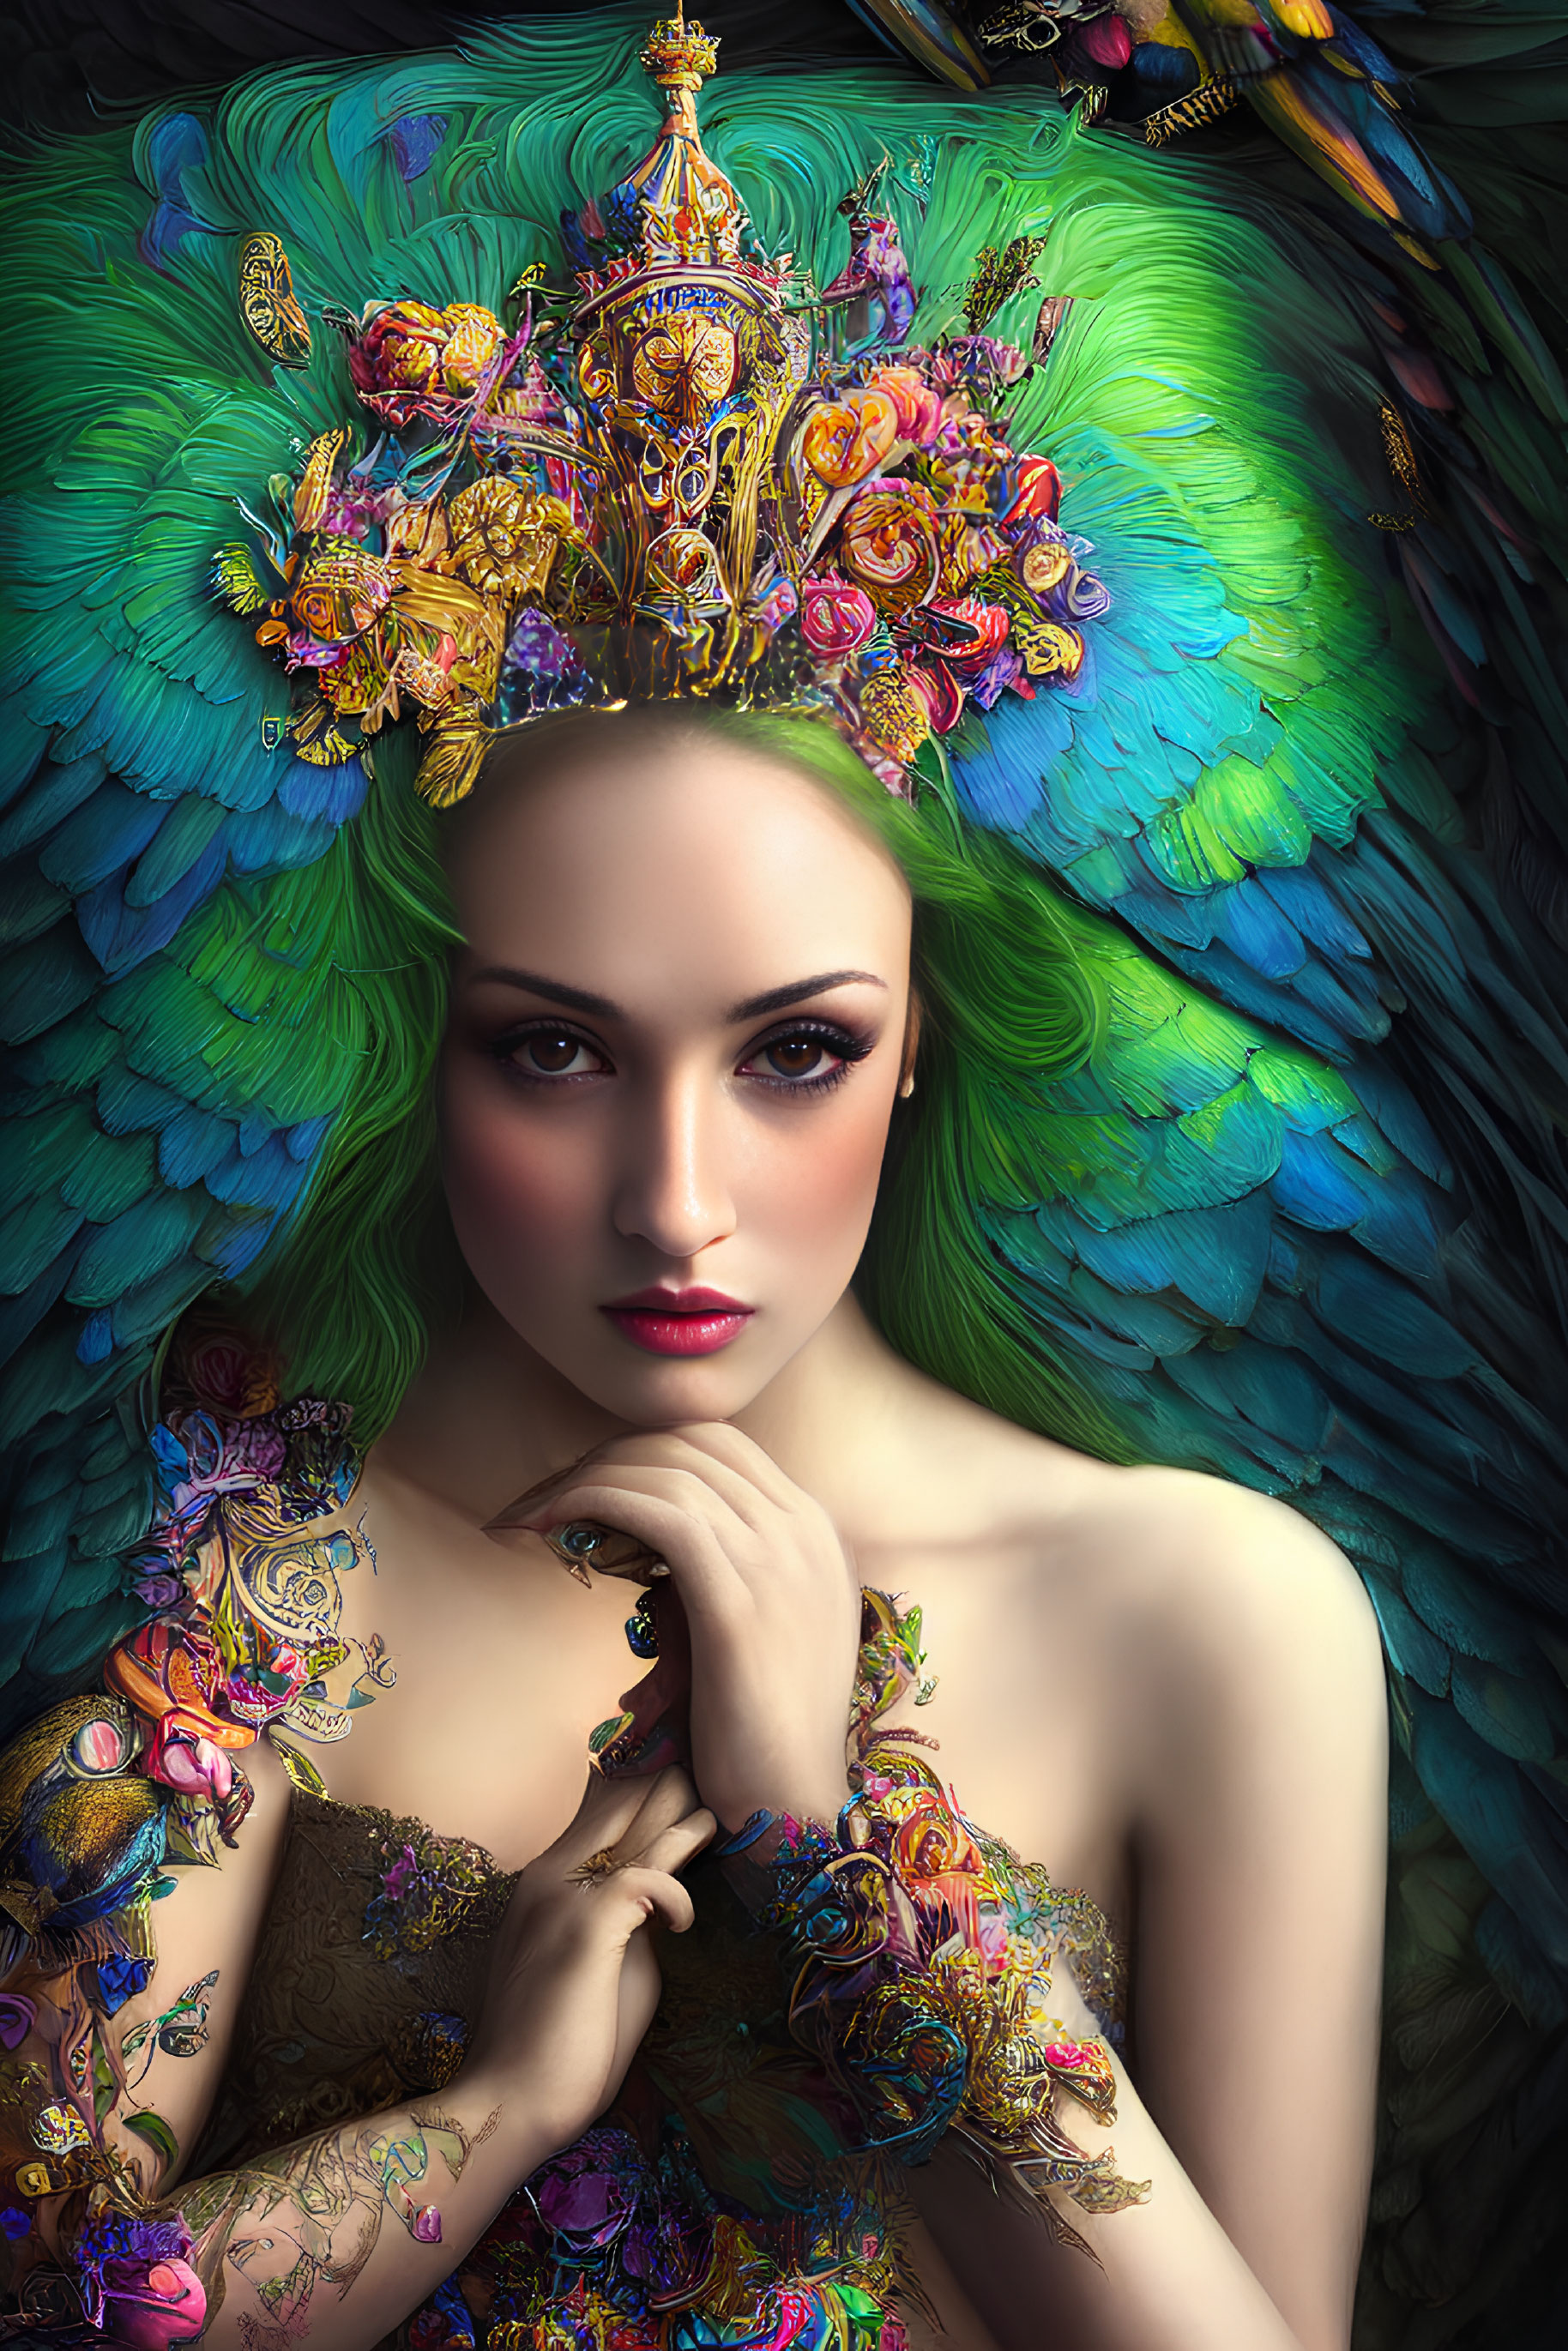 Digital portrait: Woman with peacock feather hair, crown, tattoos, contemplative expression